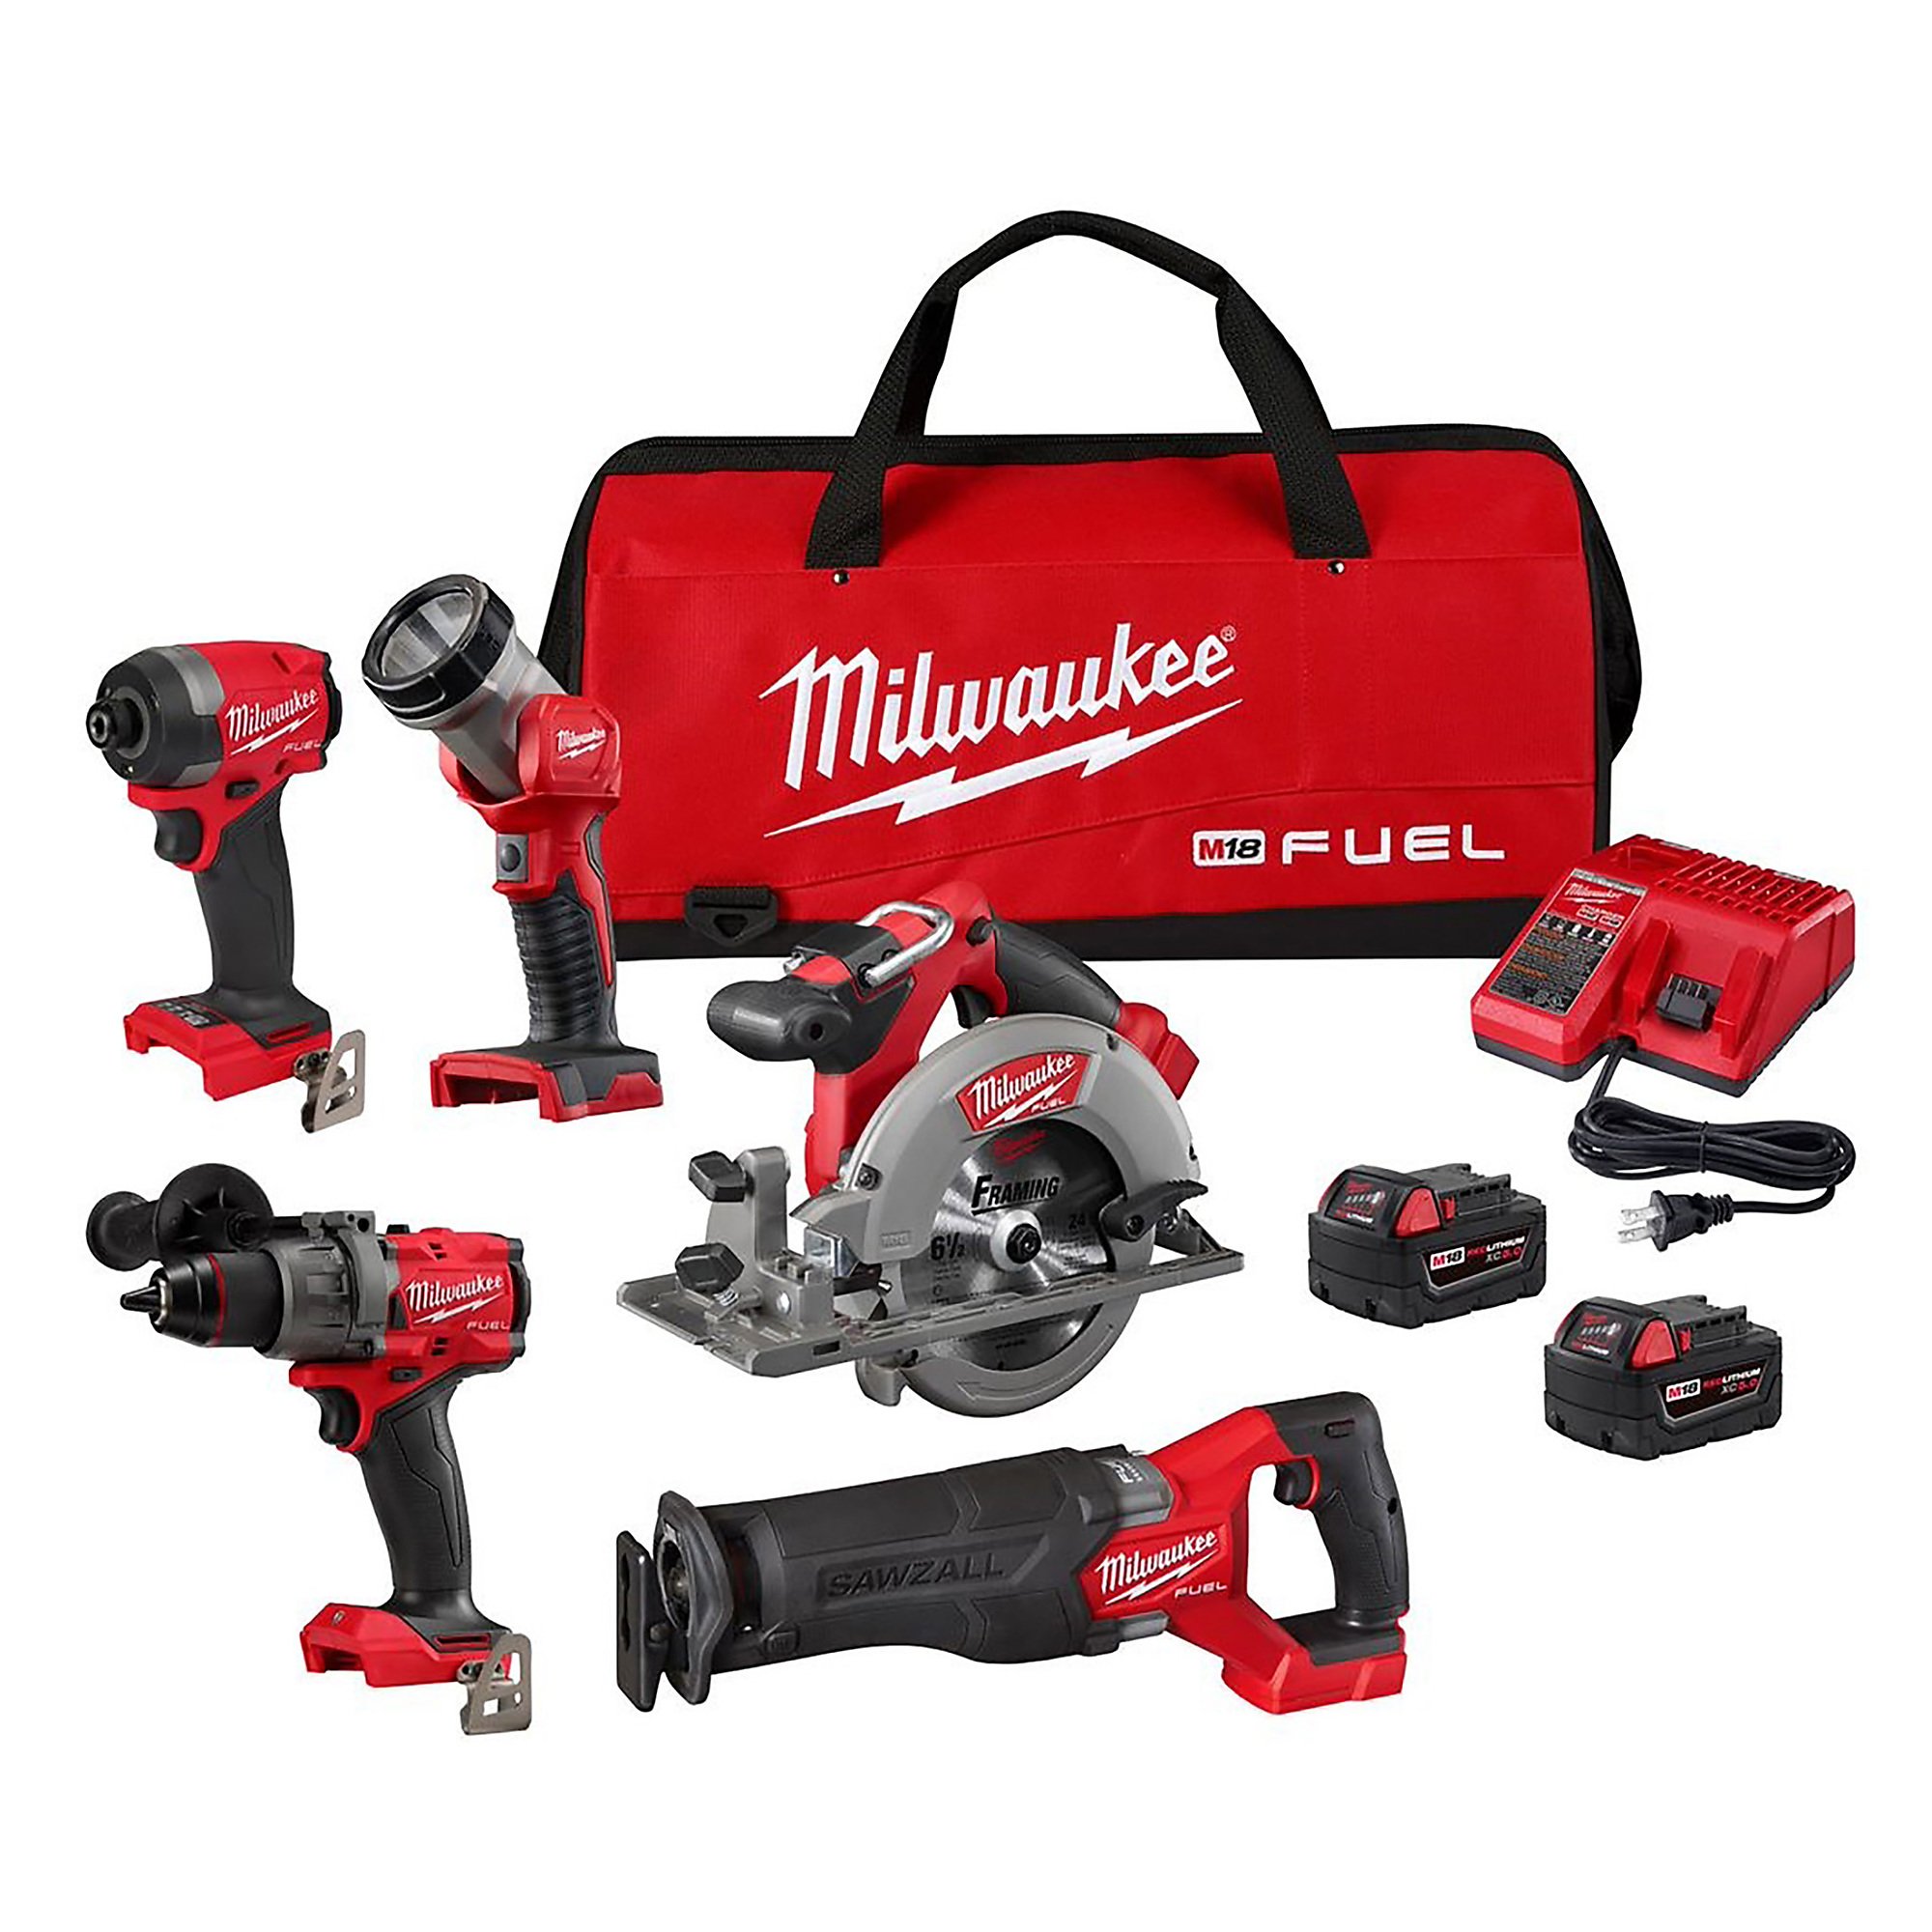 Milwaukee, M18 FUEL 5-Tool Combo Kit, Chuck Size 1/4 in, Drive Size 1/4 in, Tools Included (qty.) 5, Model 3697-25